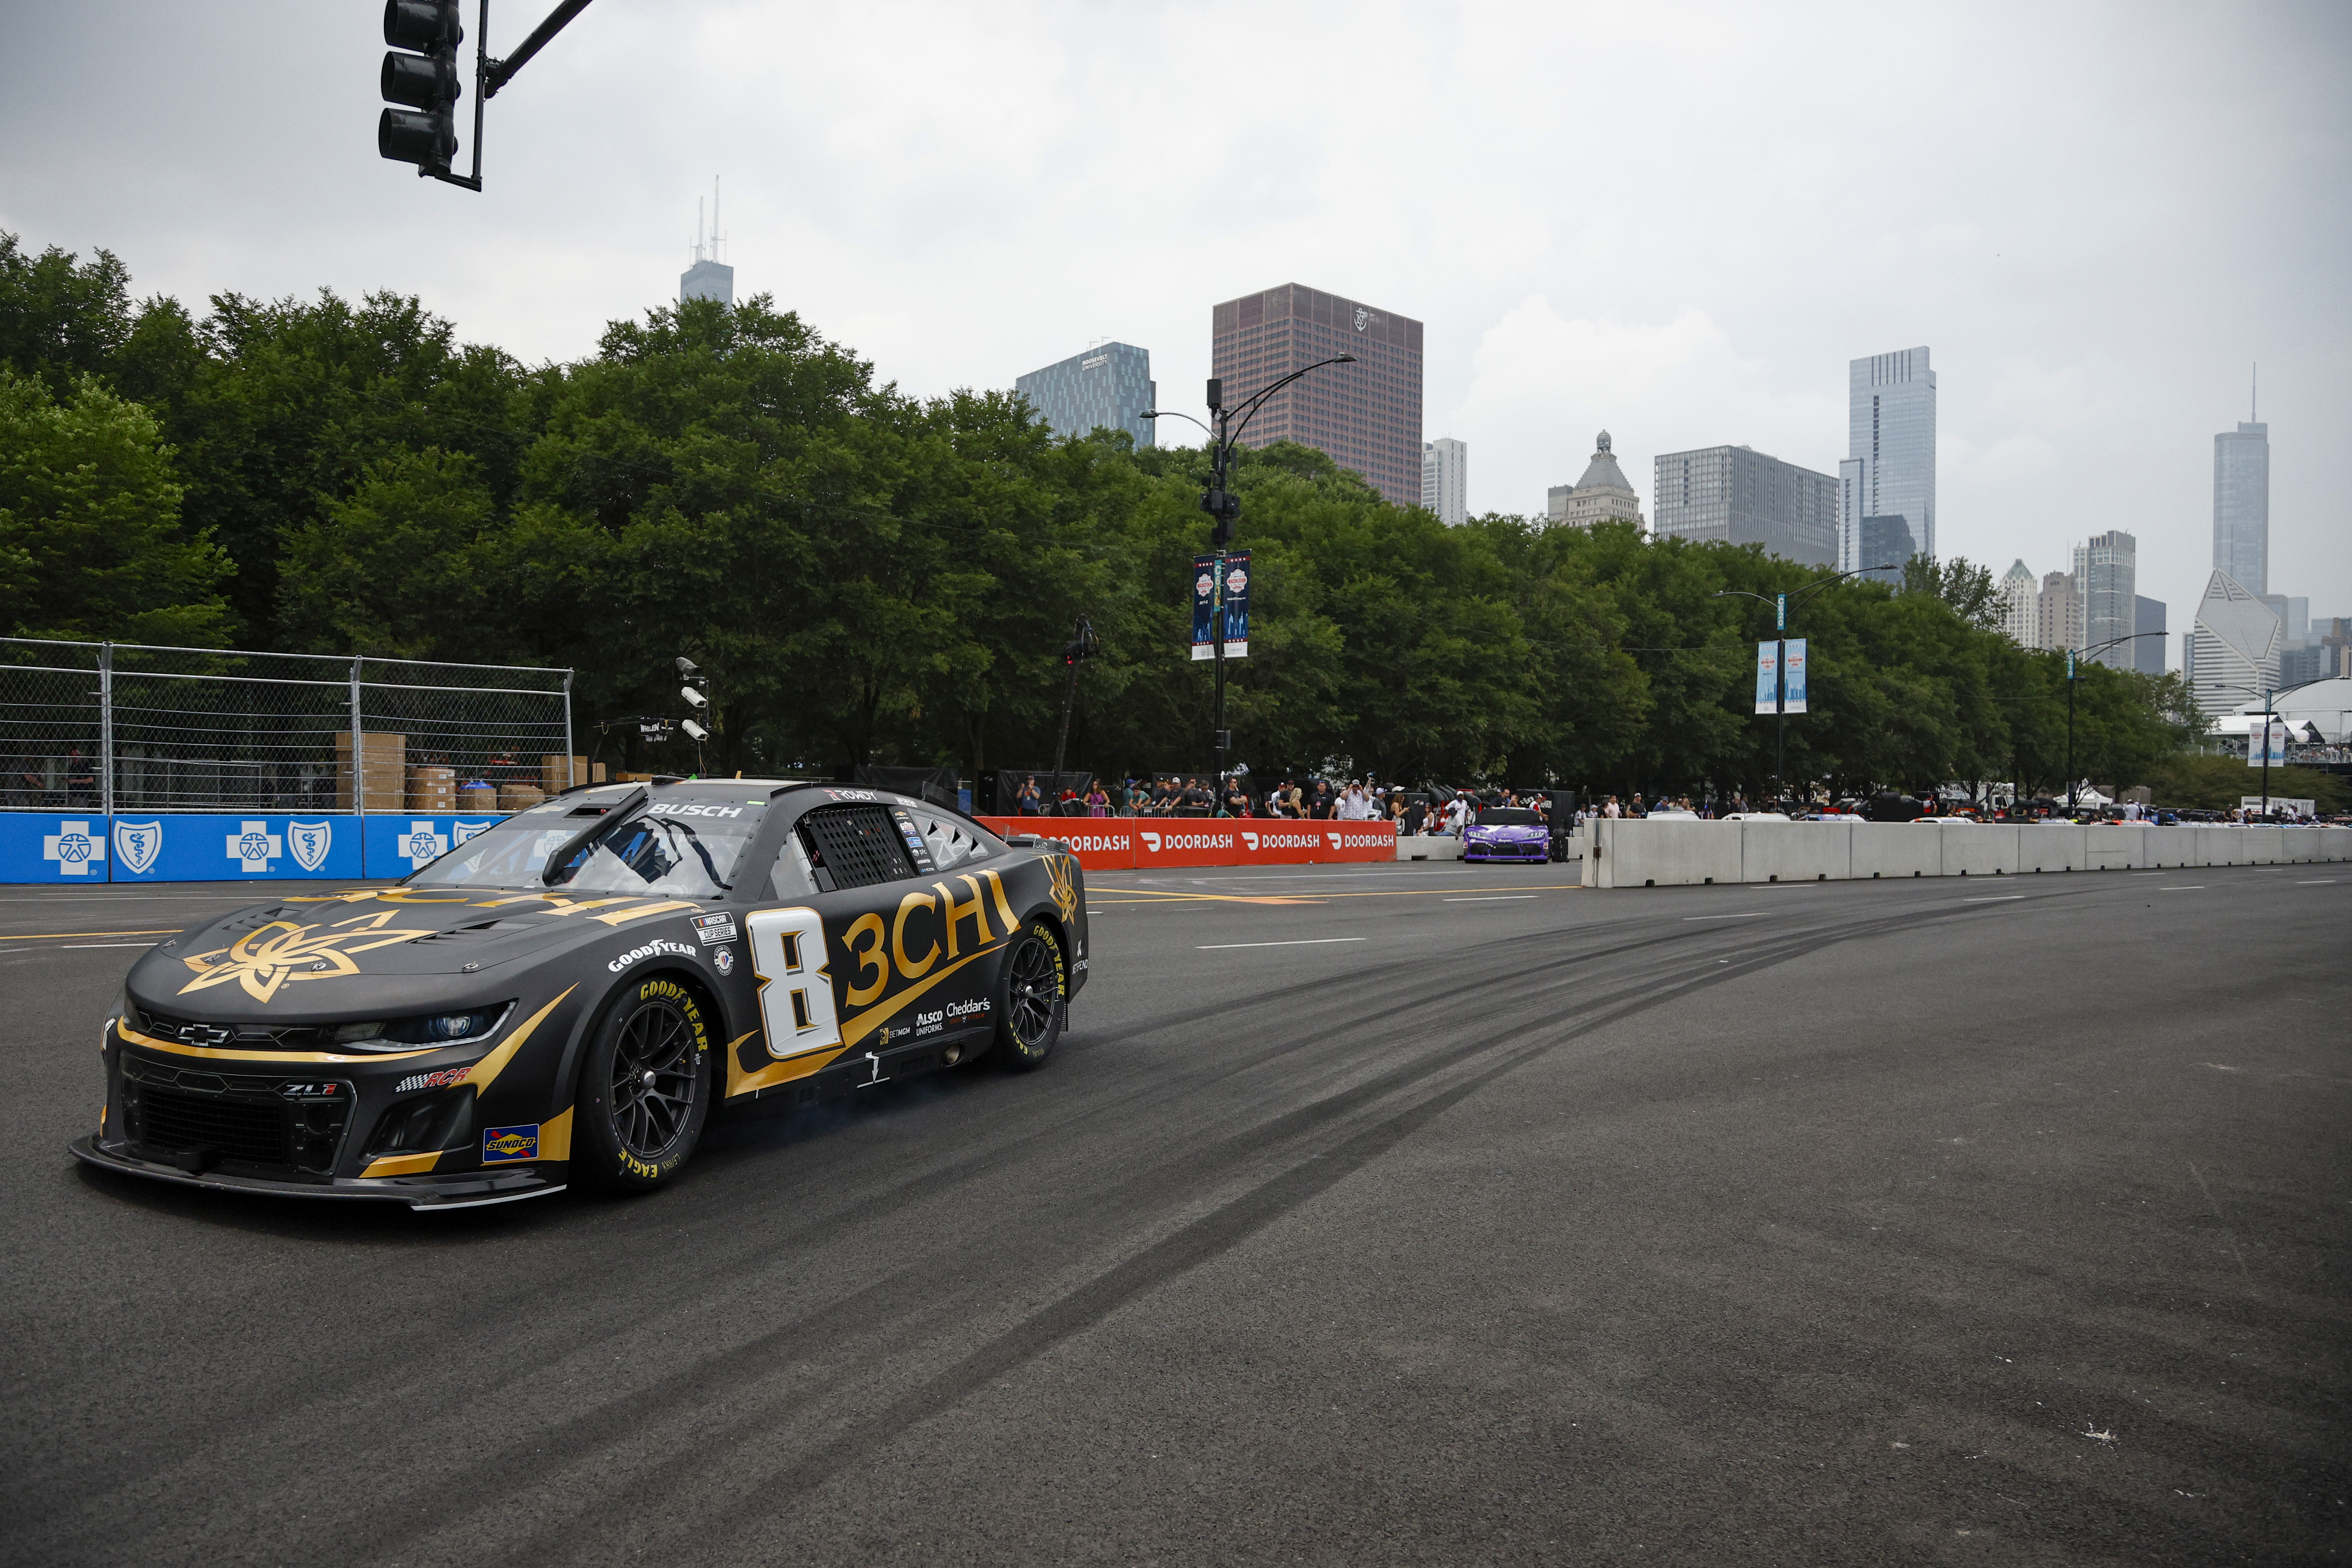 How to watch live coverage of NASCAR Chicago Street Race this weekend